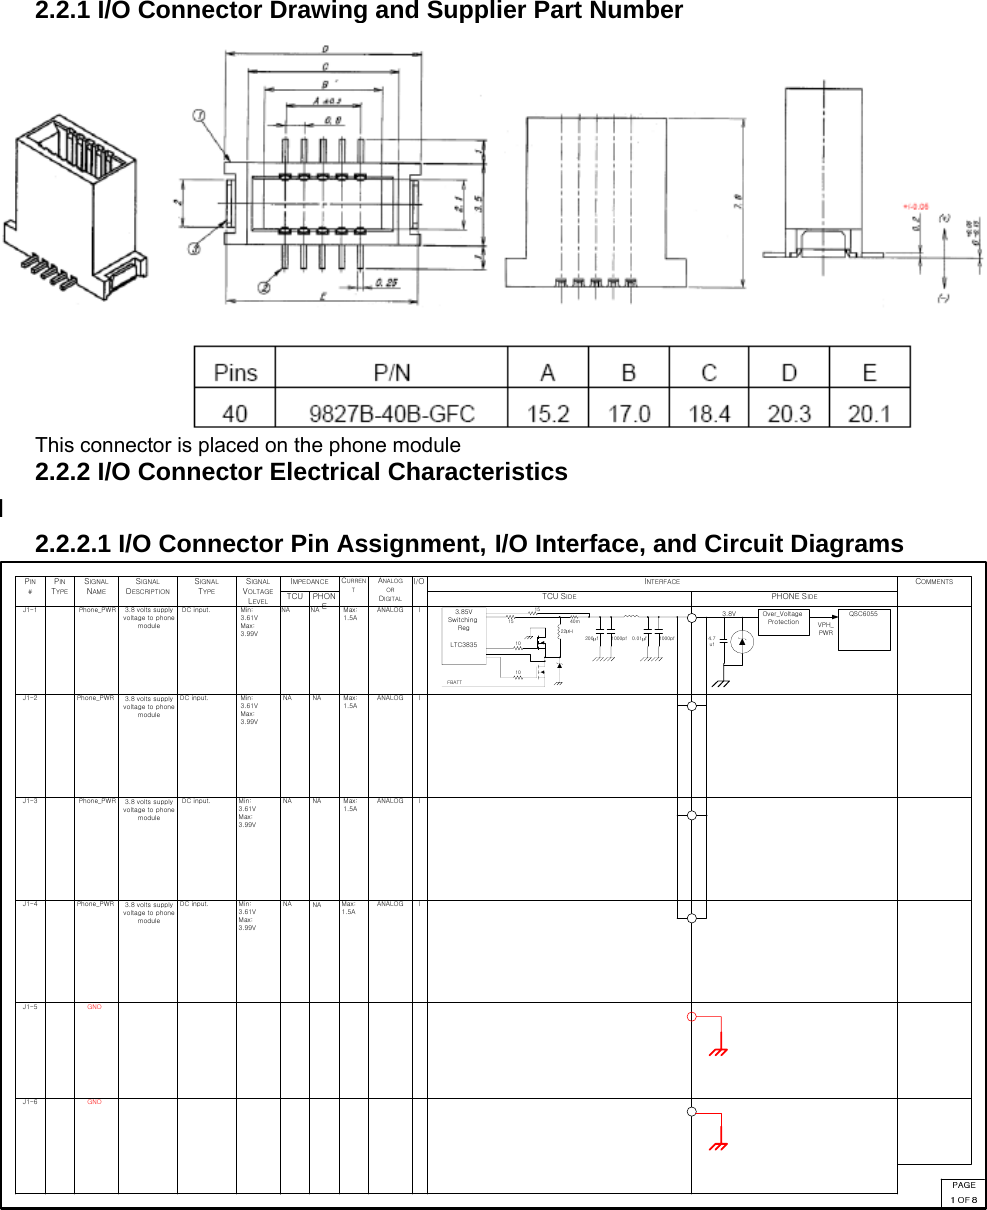 2.2.1 I/O Connector Drawing and Supplier Part Number  This connector is placed on the phone module 2.2.2 I/O Connector Electrical Characteristics I 2.2.2.1 I/O Connector Pin Assignment, I/O Interface, and Circuit Diagrams  Phone_PWR Min:3.61VMax:3.99VMax:1.5AISIGNALDESCRIPTIONSIGNALVOLTAGELEVELIMPEDANCETCU PHONECURRENTI/O INTERFACETCU SIDE PHONE SIDESIGNALNAMECOMMENTSSIGNALTYPEANALOGORDIGITALDC input. ANALOGPIN#J1-1PINTYPEJ1-2J1-3J1-4J1-5J1-6Phone_PWRPhone_PWRPhone_PWRGNDGND3.8 volts supplyvoltage to phonemodule3.8 volts supplyvoltage to phonemoduleDC input. Min:3.61VMax:3.99VNA NANANA Max:1.5AANALOG I3.8 volts supplyvoltage to phonemoduleDC input. Min:3.61VMax:3.99VNA NA Max:1.5AANALOG I3.8 volts supplyvoltage to phonemoduleDC input. Min:3.61VMax:3.99VNA NA Max:1.5AANALOG IOver_VoltageProtection3.8V QSC6055VPH_PWR4.7uf1000pf0.01 f1000pf200 f3.85VSwitching RegLTC383522 H40m10101515FBATT 